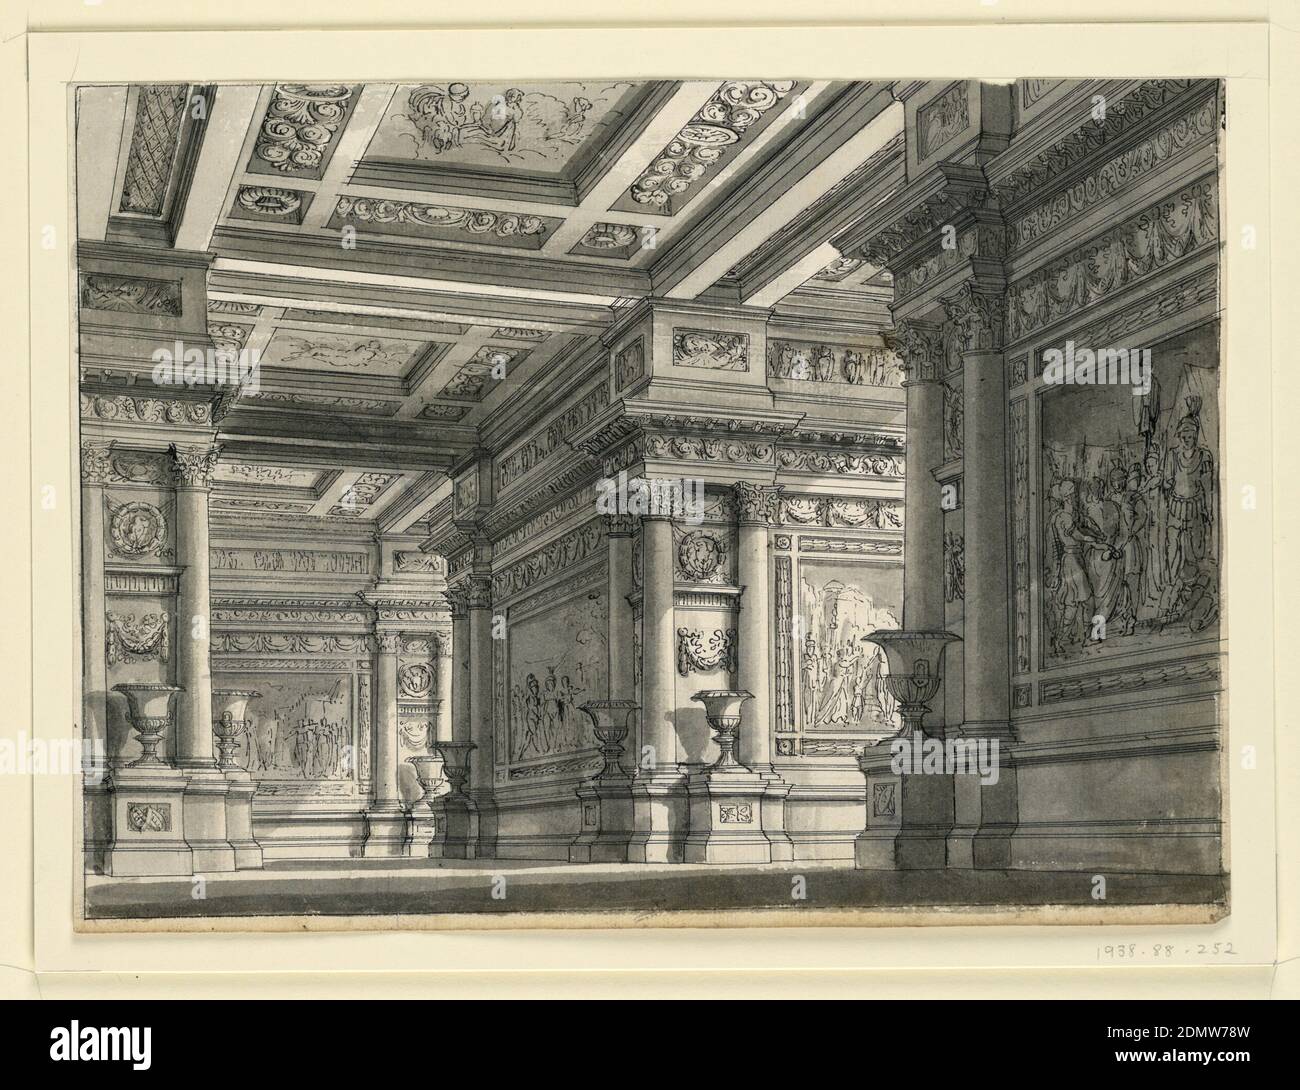 Stage Design, Room in the Palace of Titus for the Opera 'La Clemenza di Tito' by Mozart, Romolo Achille Liverani, Italian, 1809 - 1872, Alessandro Sanquirico, Italian, 1777 - 1849, Pen and black ink, brush and gray wash on white laid paper, Horizontal rectangle. Interior of vast hall decorated with pictures on walls in architectural setting., Milan, Italy, 1818–19, theater, Drawing Stock Photo